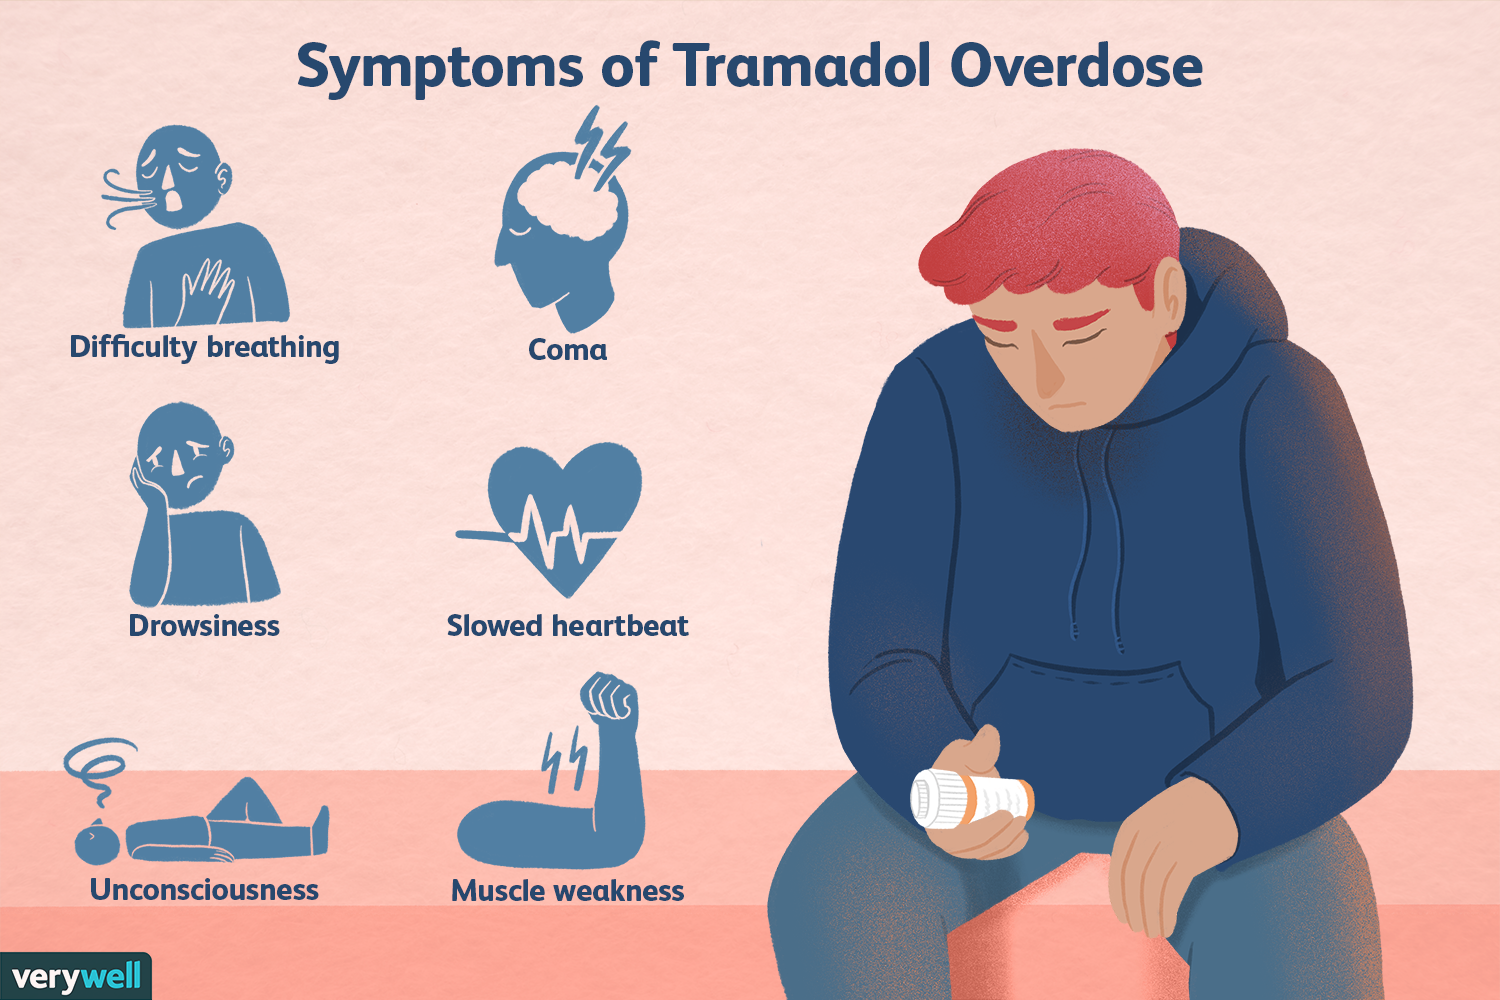 Tramadol Overdose Side Effects